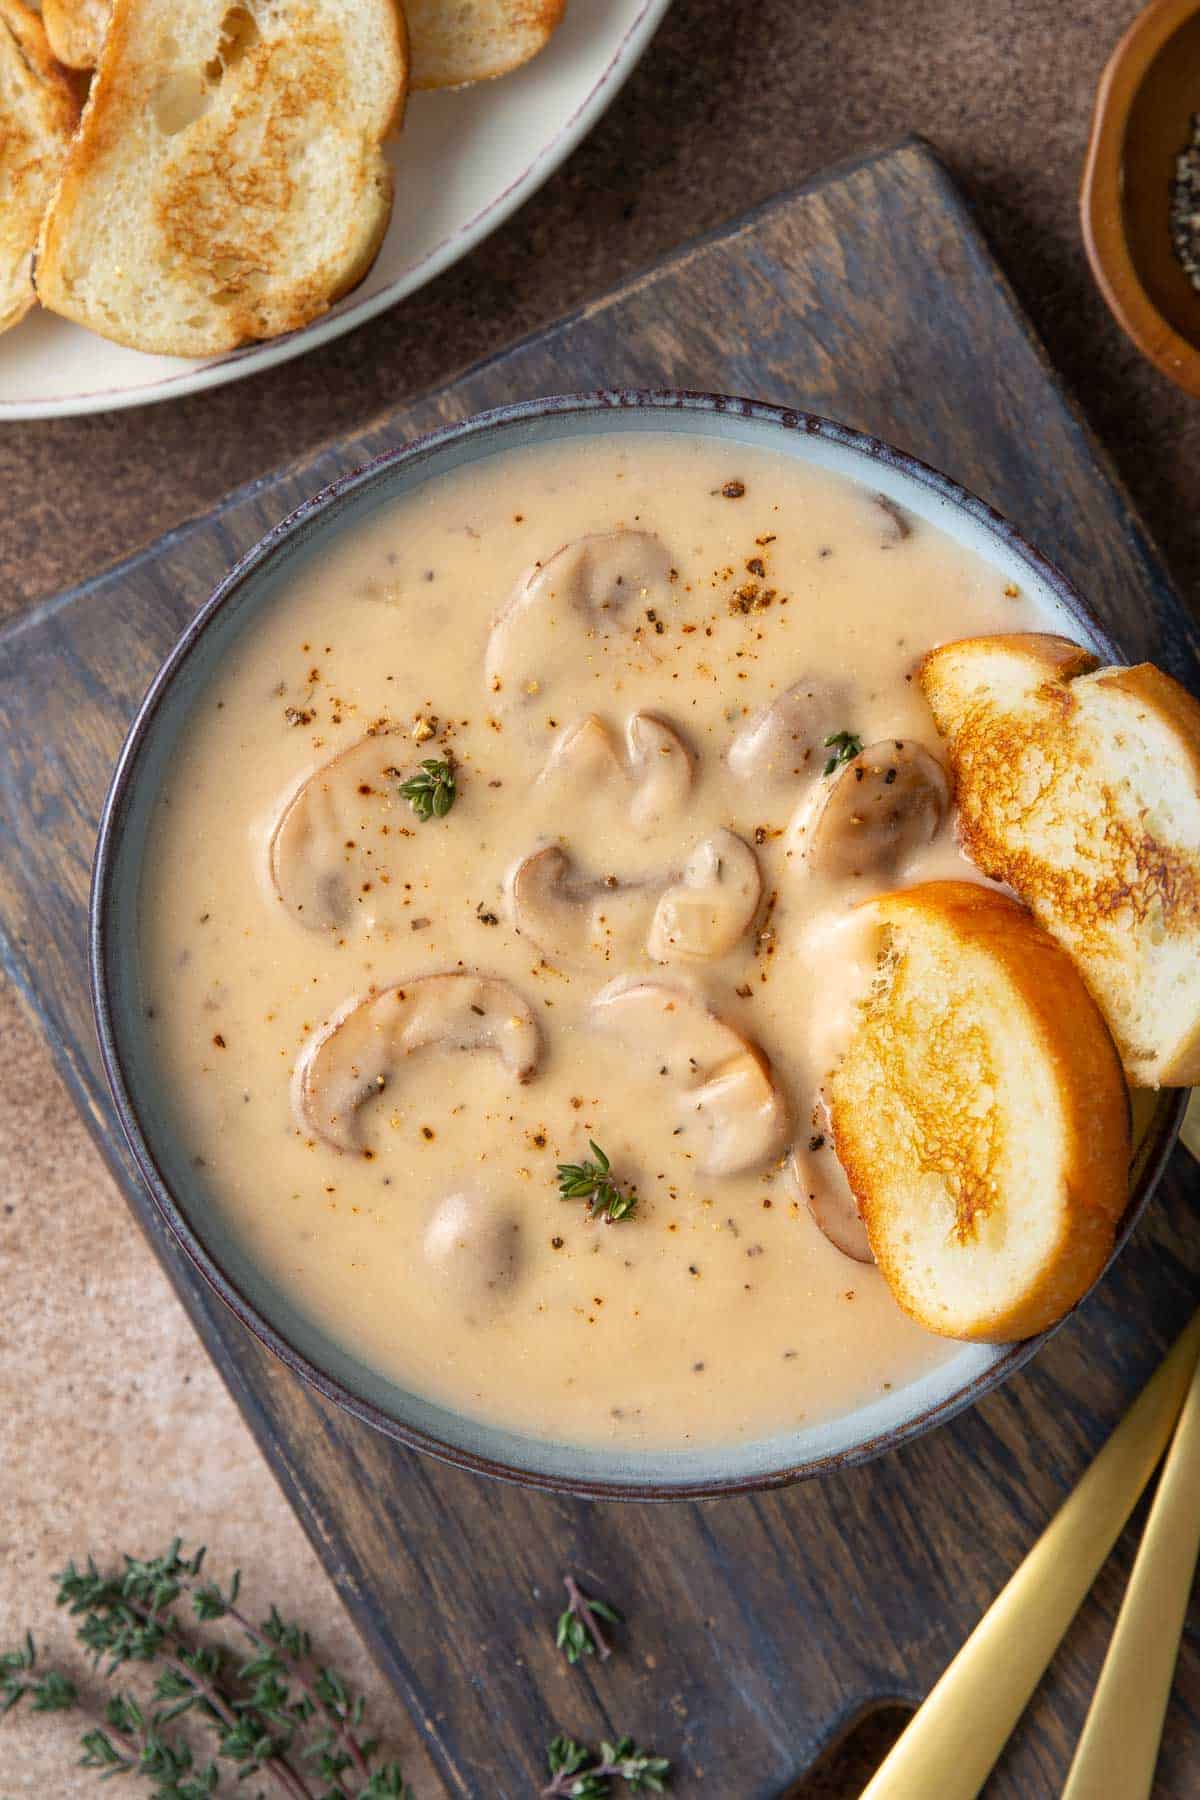 Overhead view of cream of mushroom soup in a blue bowl with French bread.